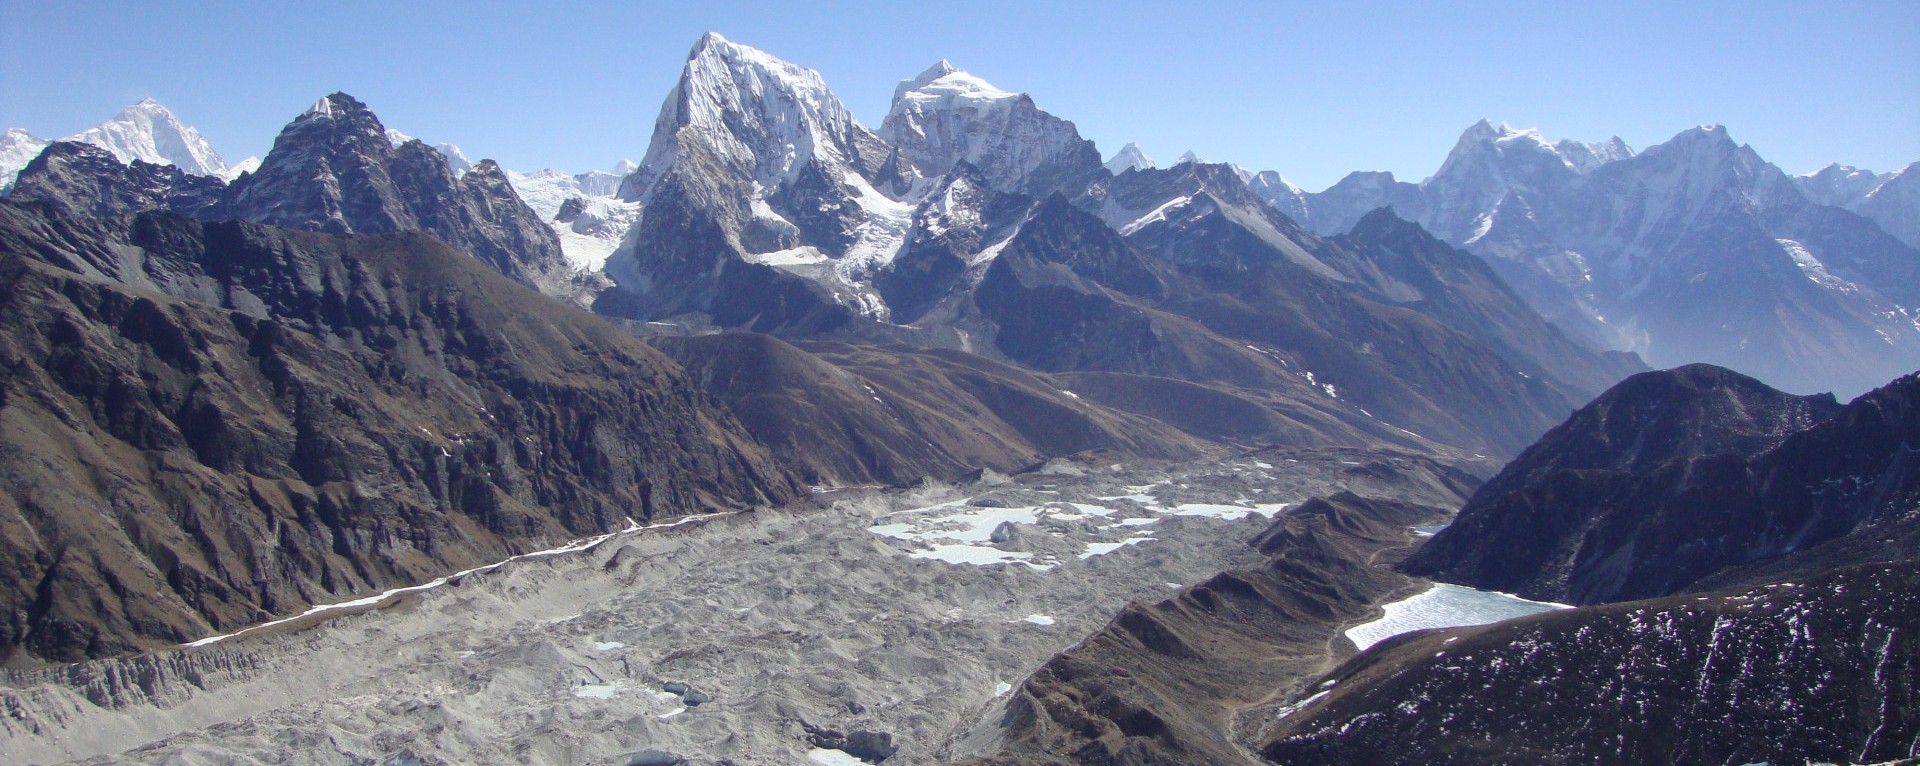 Everest Base camp at the altitude of 5364m.